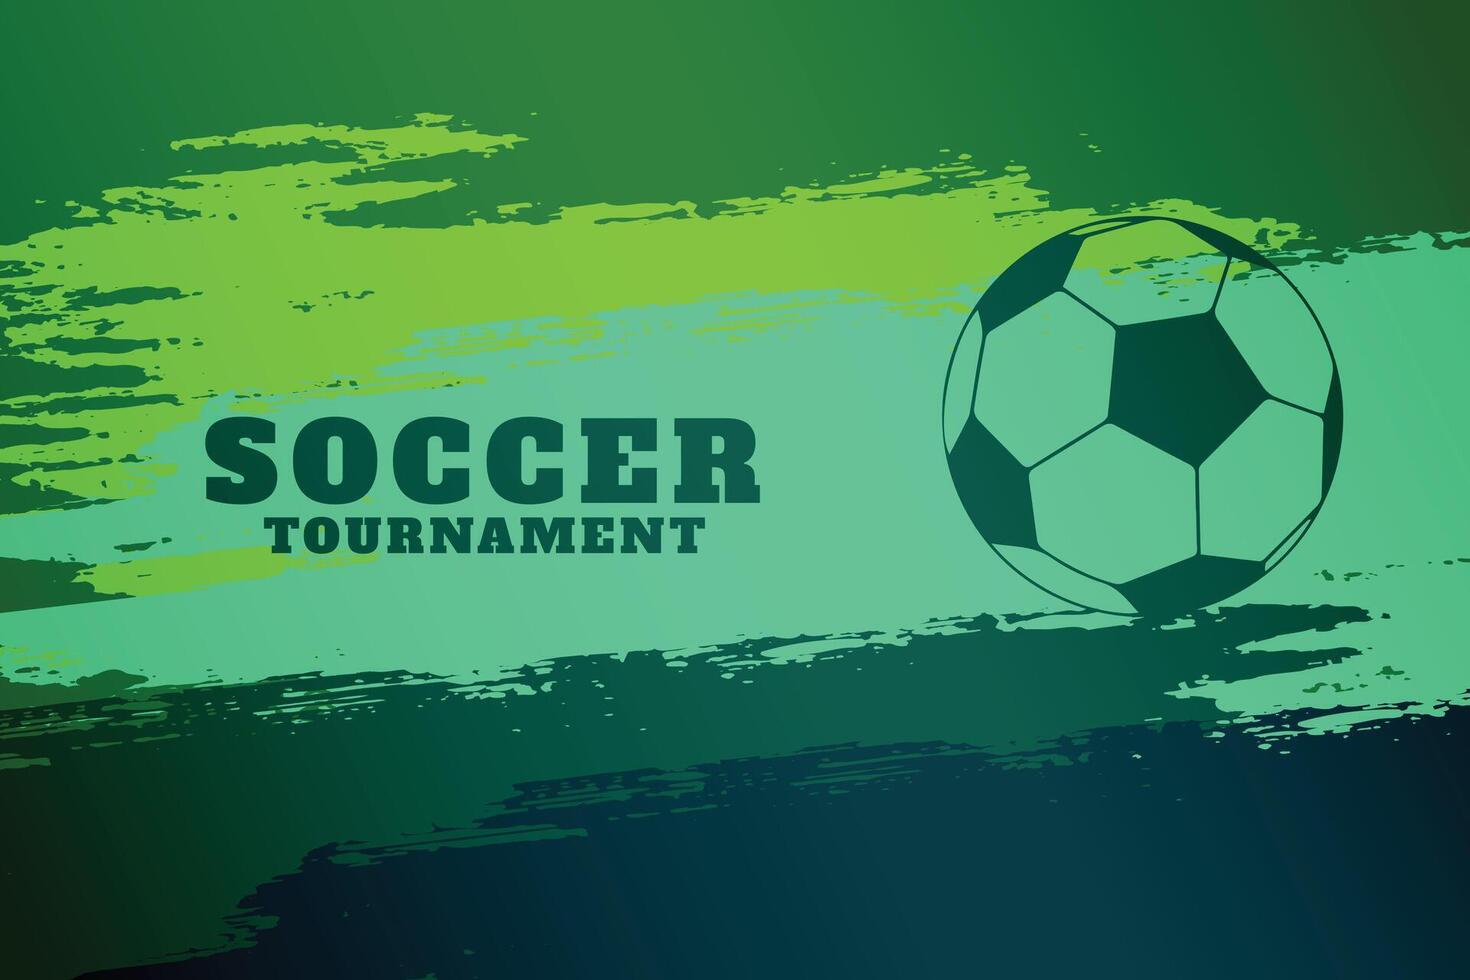 grungy style sporty soccer tournament background paly and win vector